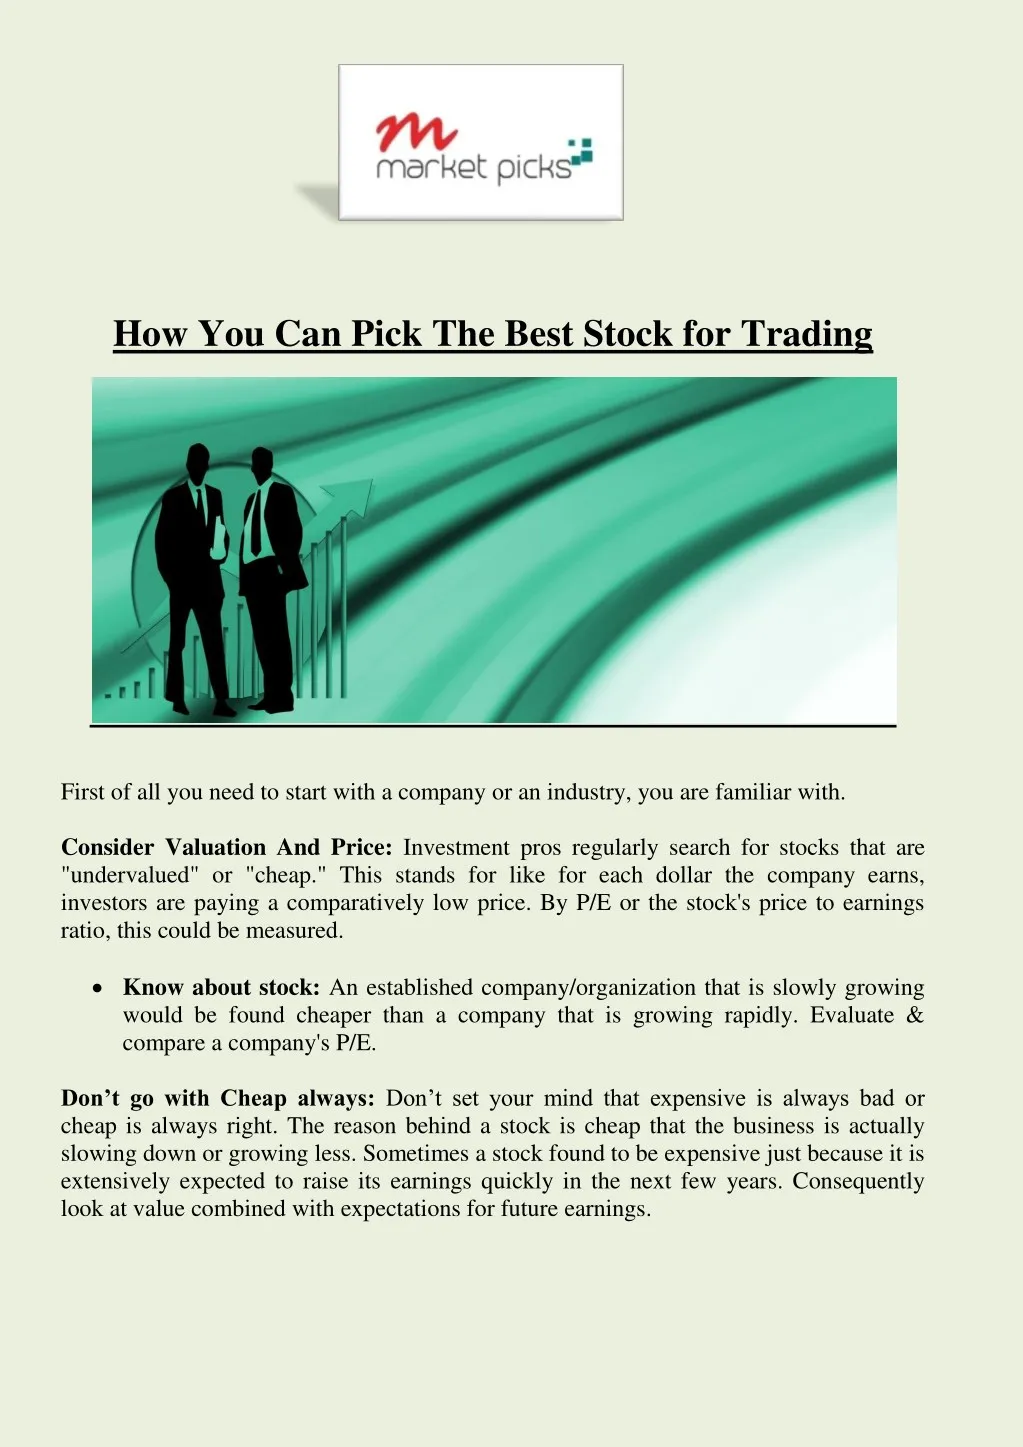 how you can pick the best stock for trading